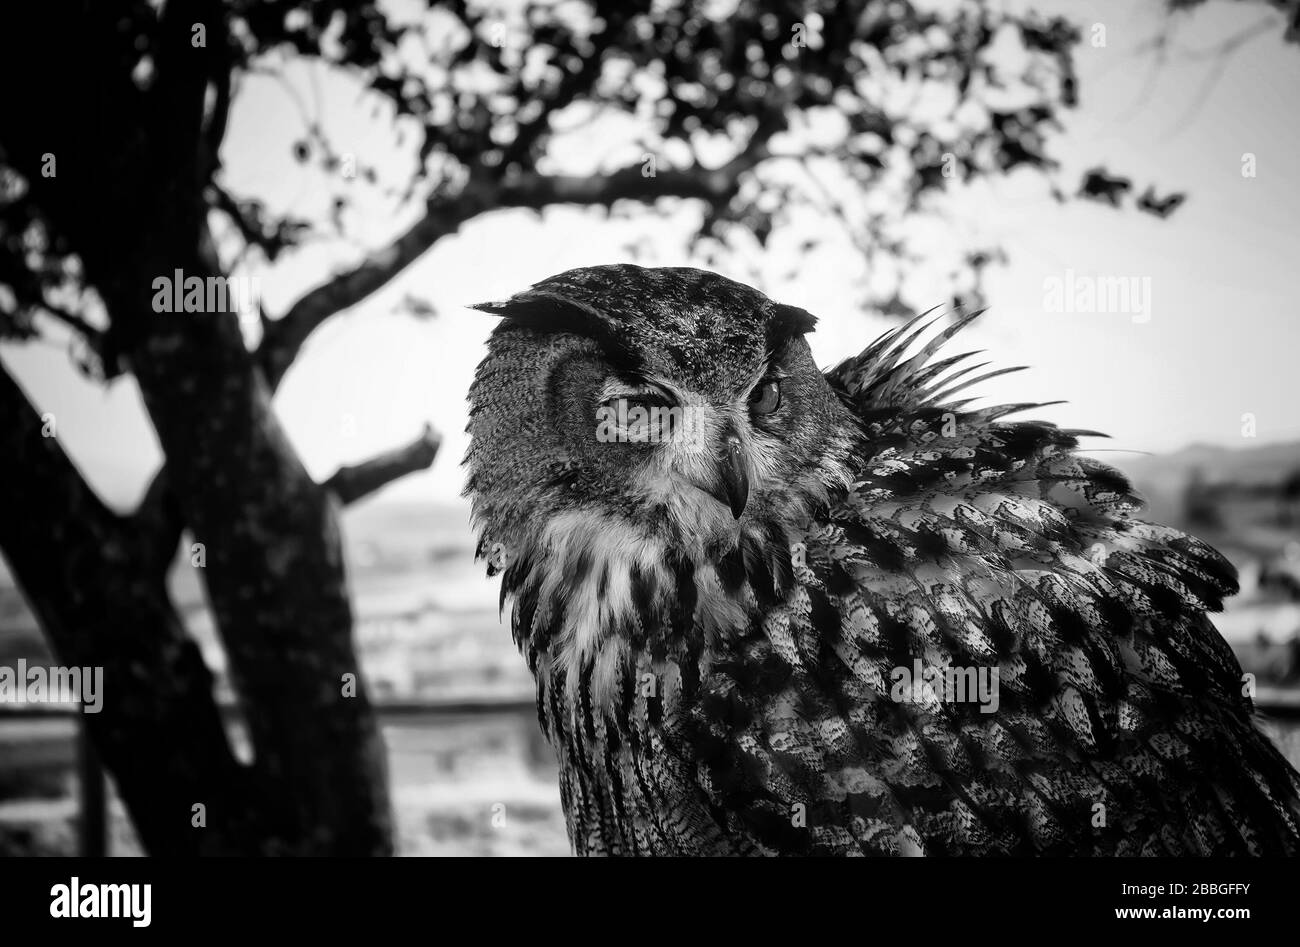 Owl in falconry, wild animals and nature Stock Photo